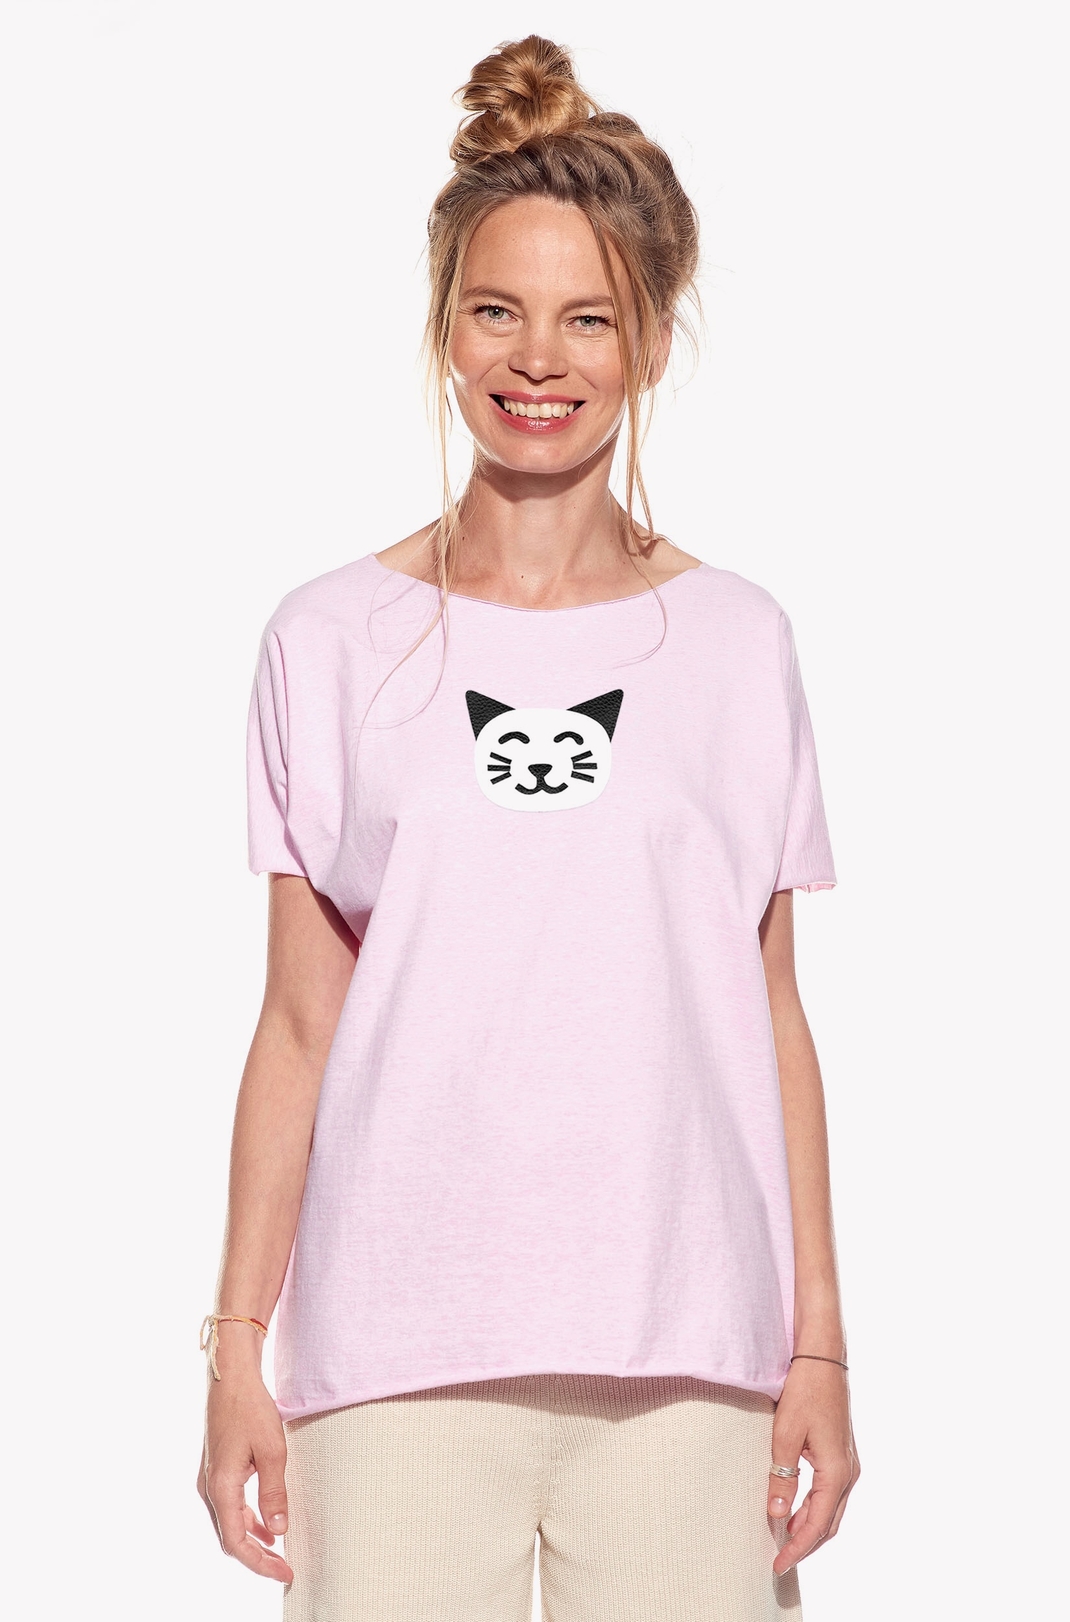 Shirt with cat